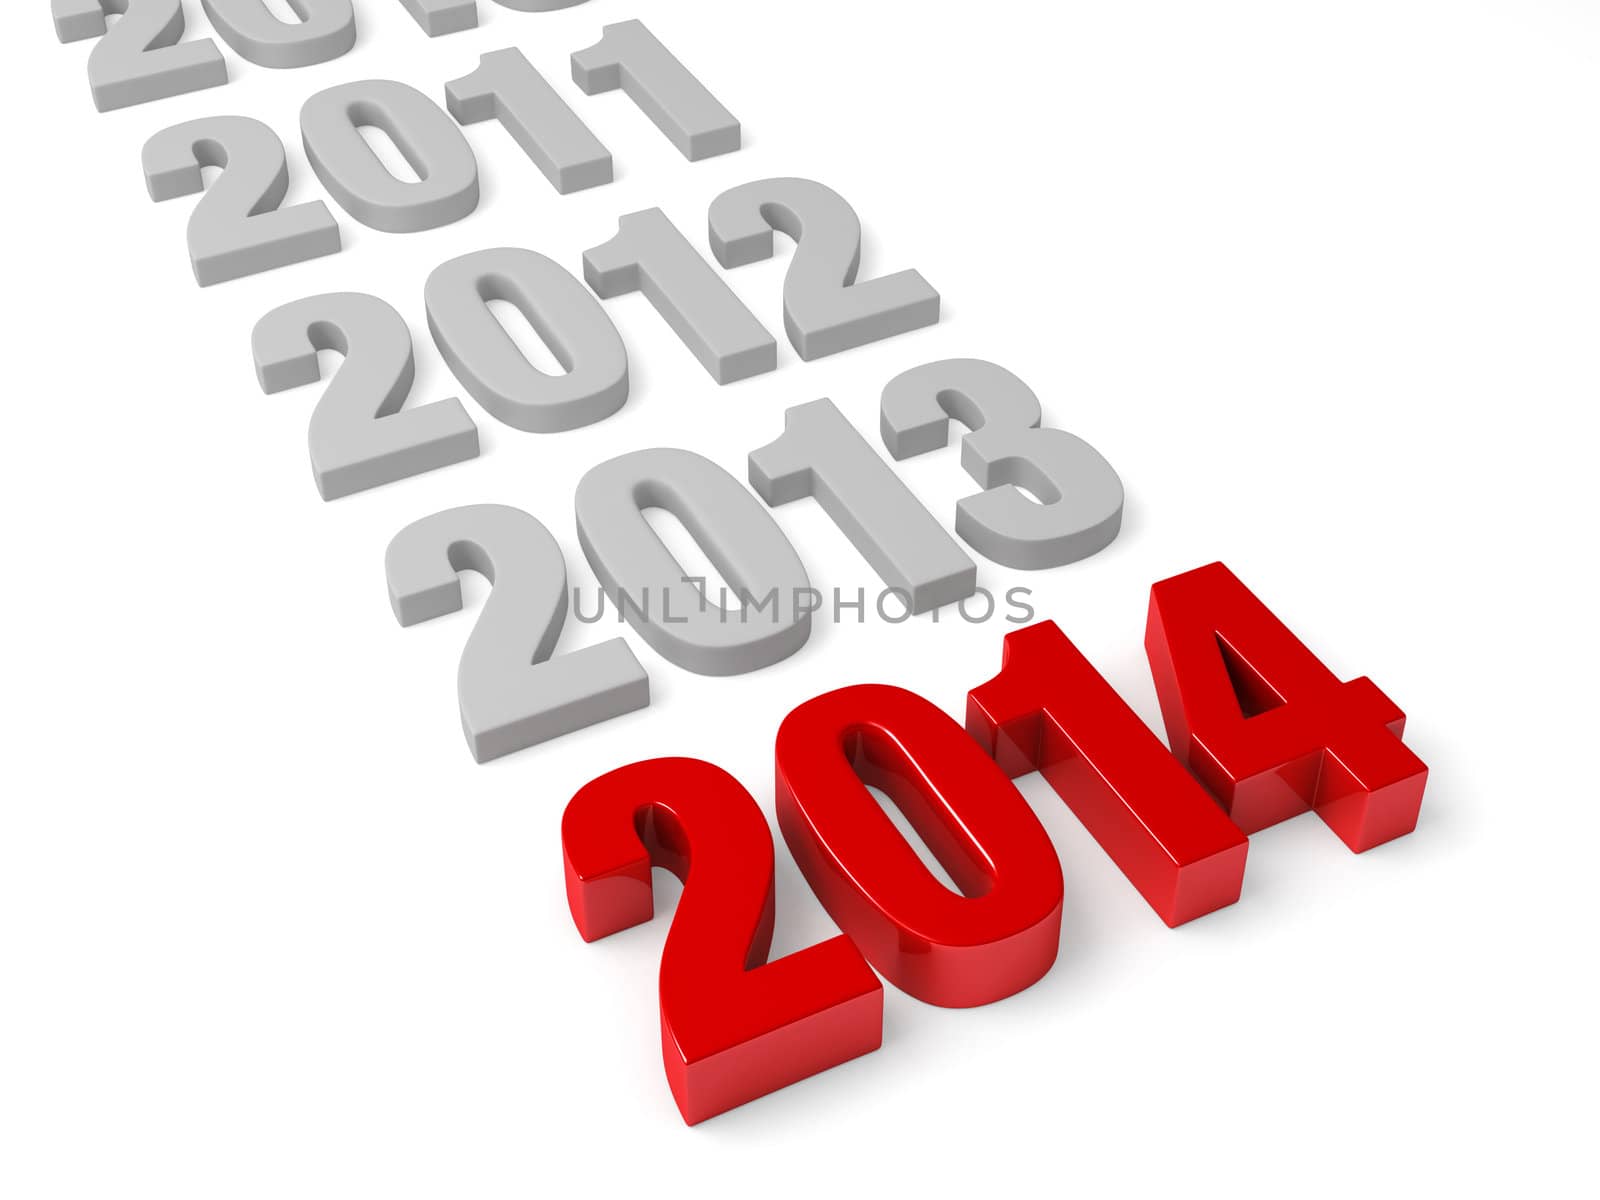 2014 in shiny Red Letters followed by the years recently past in muted gray. Isolated on white.